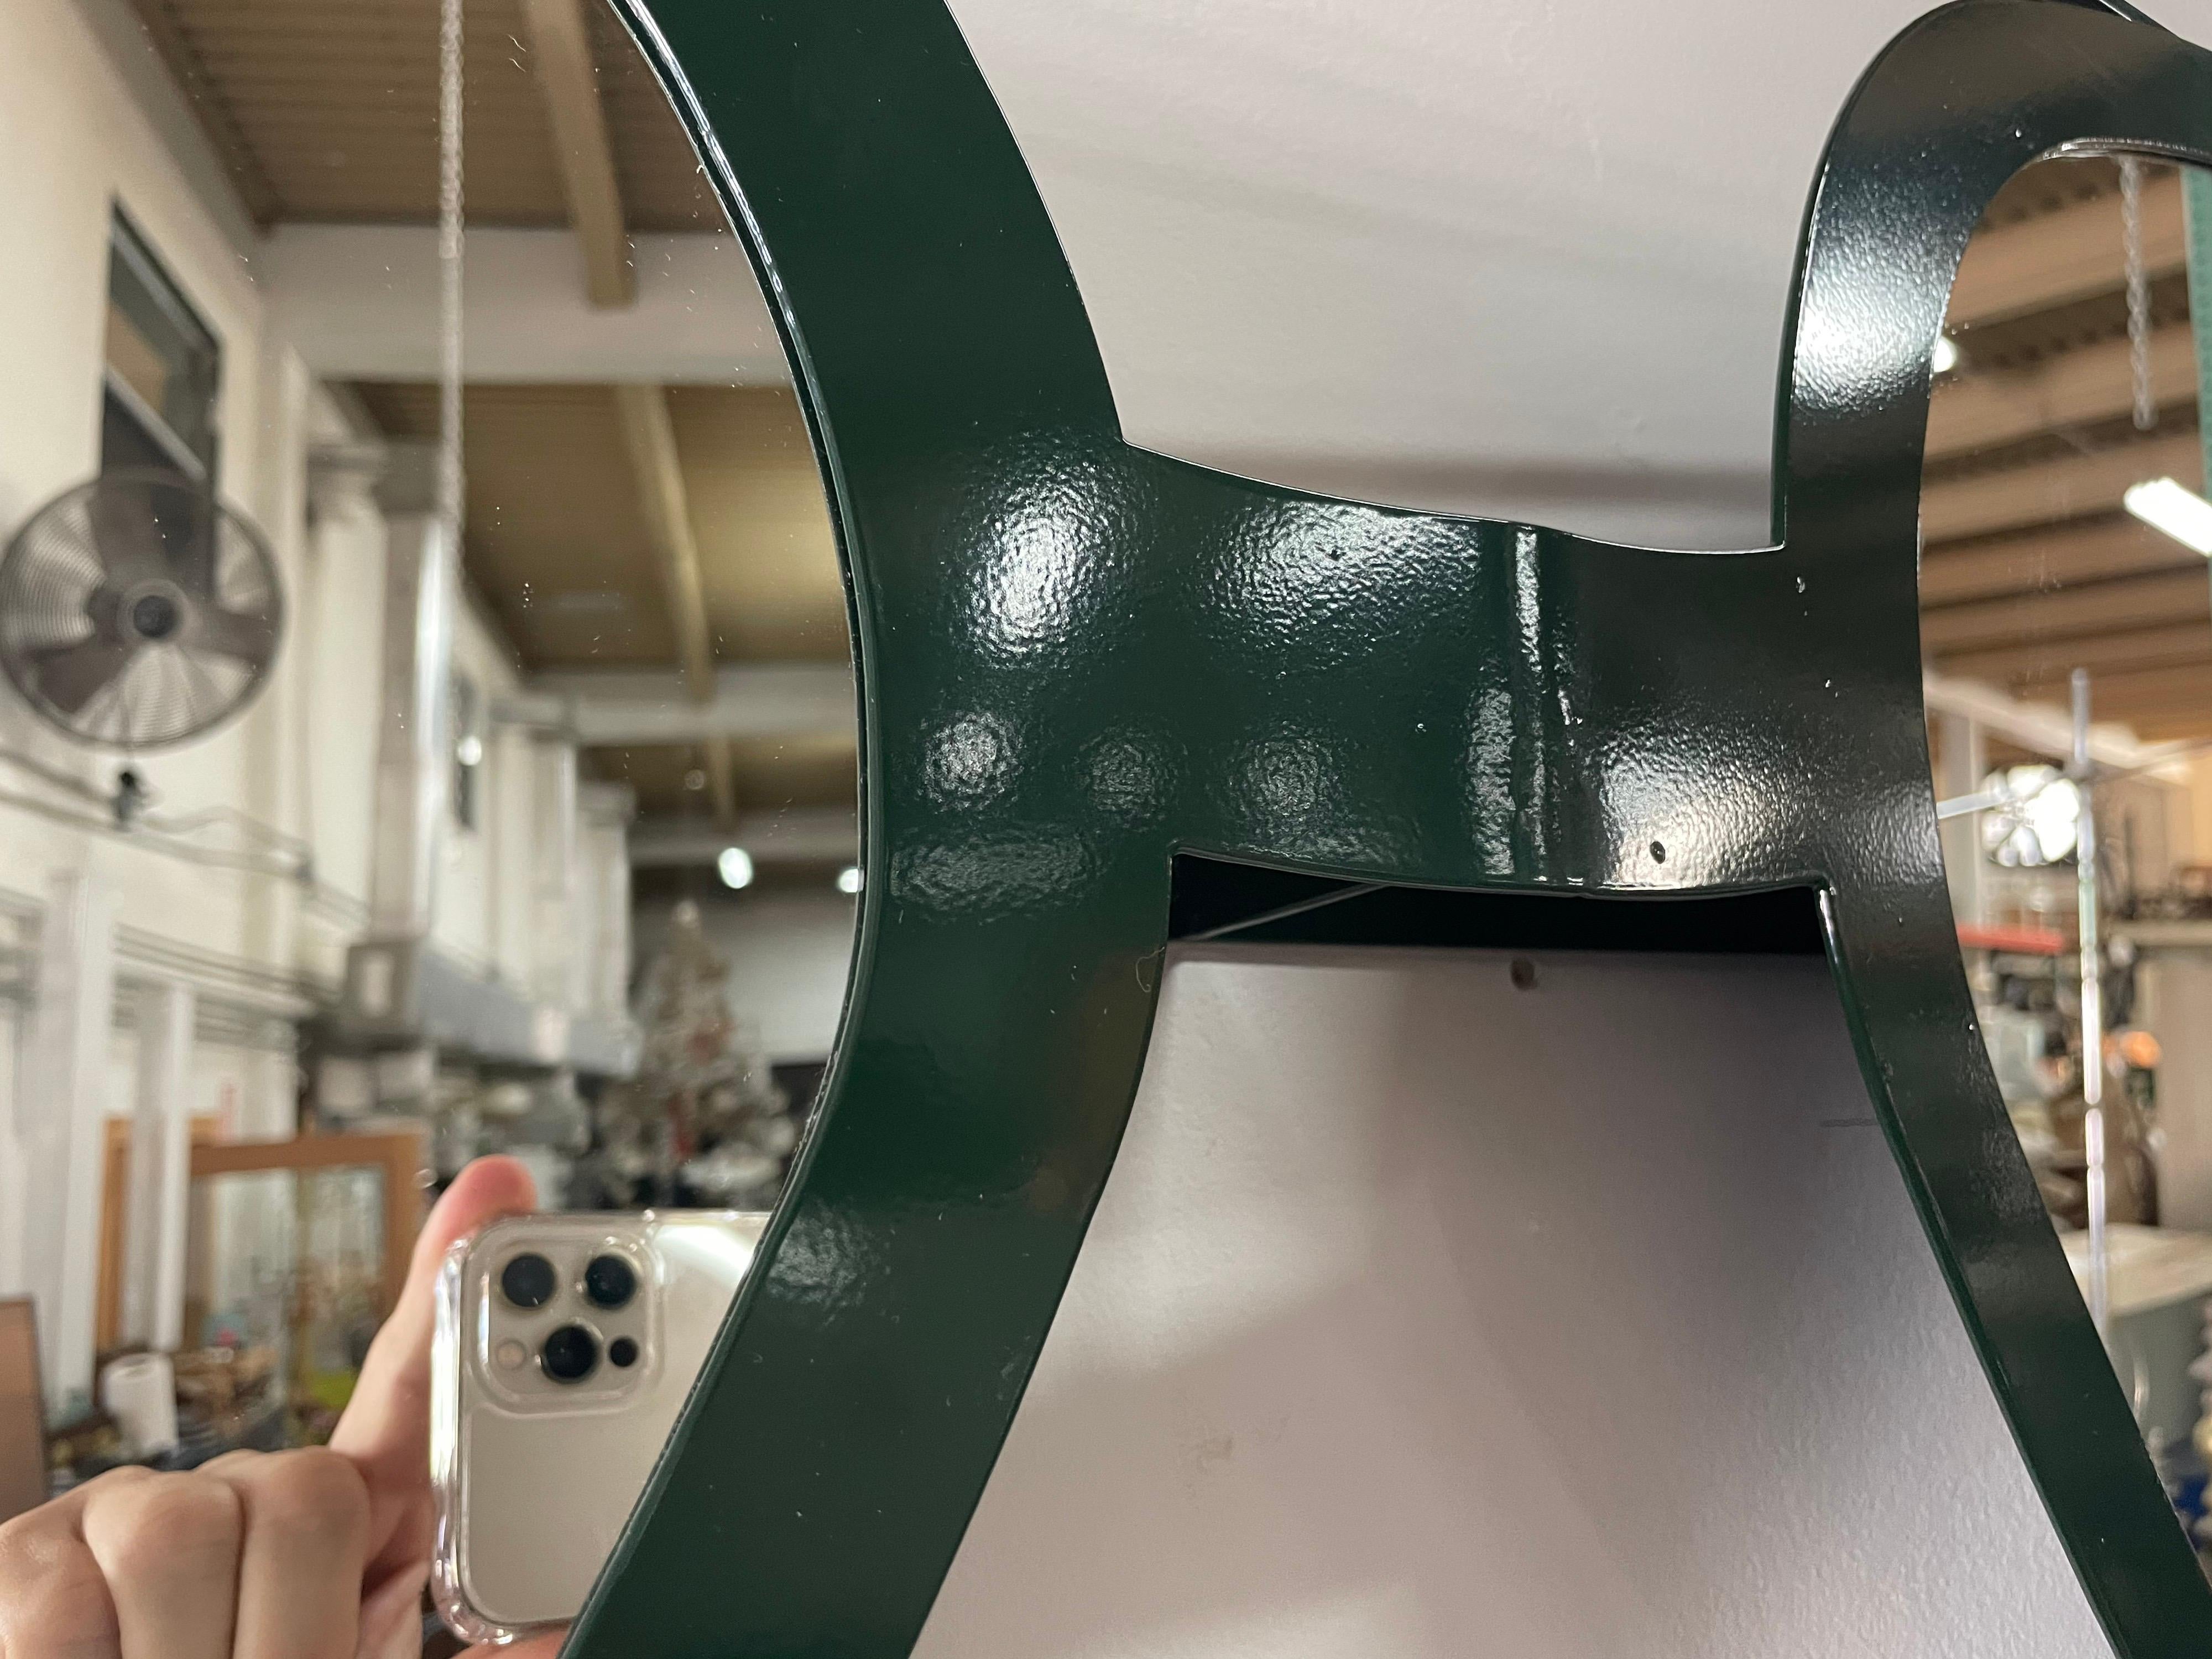 This is out of this world, so cool and fun in this vibrant forest green powder-coated frame with mirror inserts makes for an awesome accent to a foyer, powder-room or kids room. The Aviator style sunglasses with mirror lenses are a perfect statement